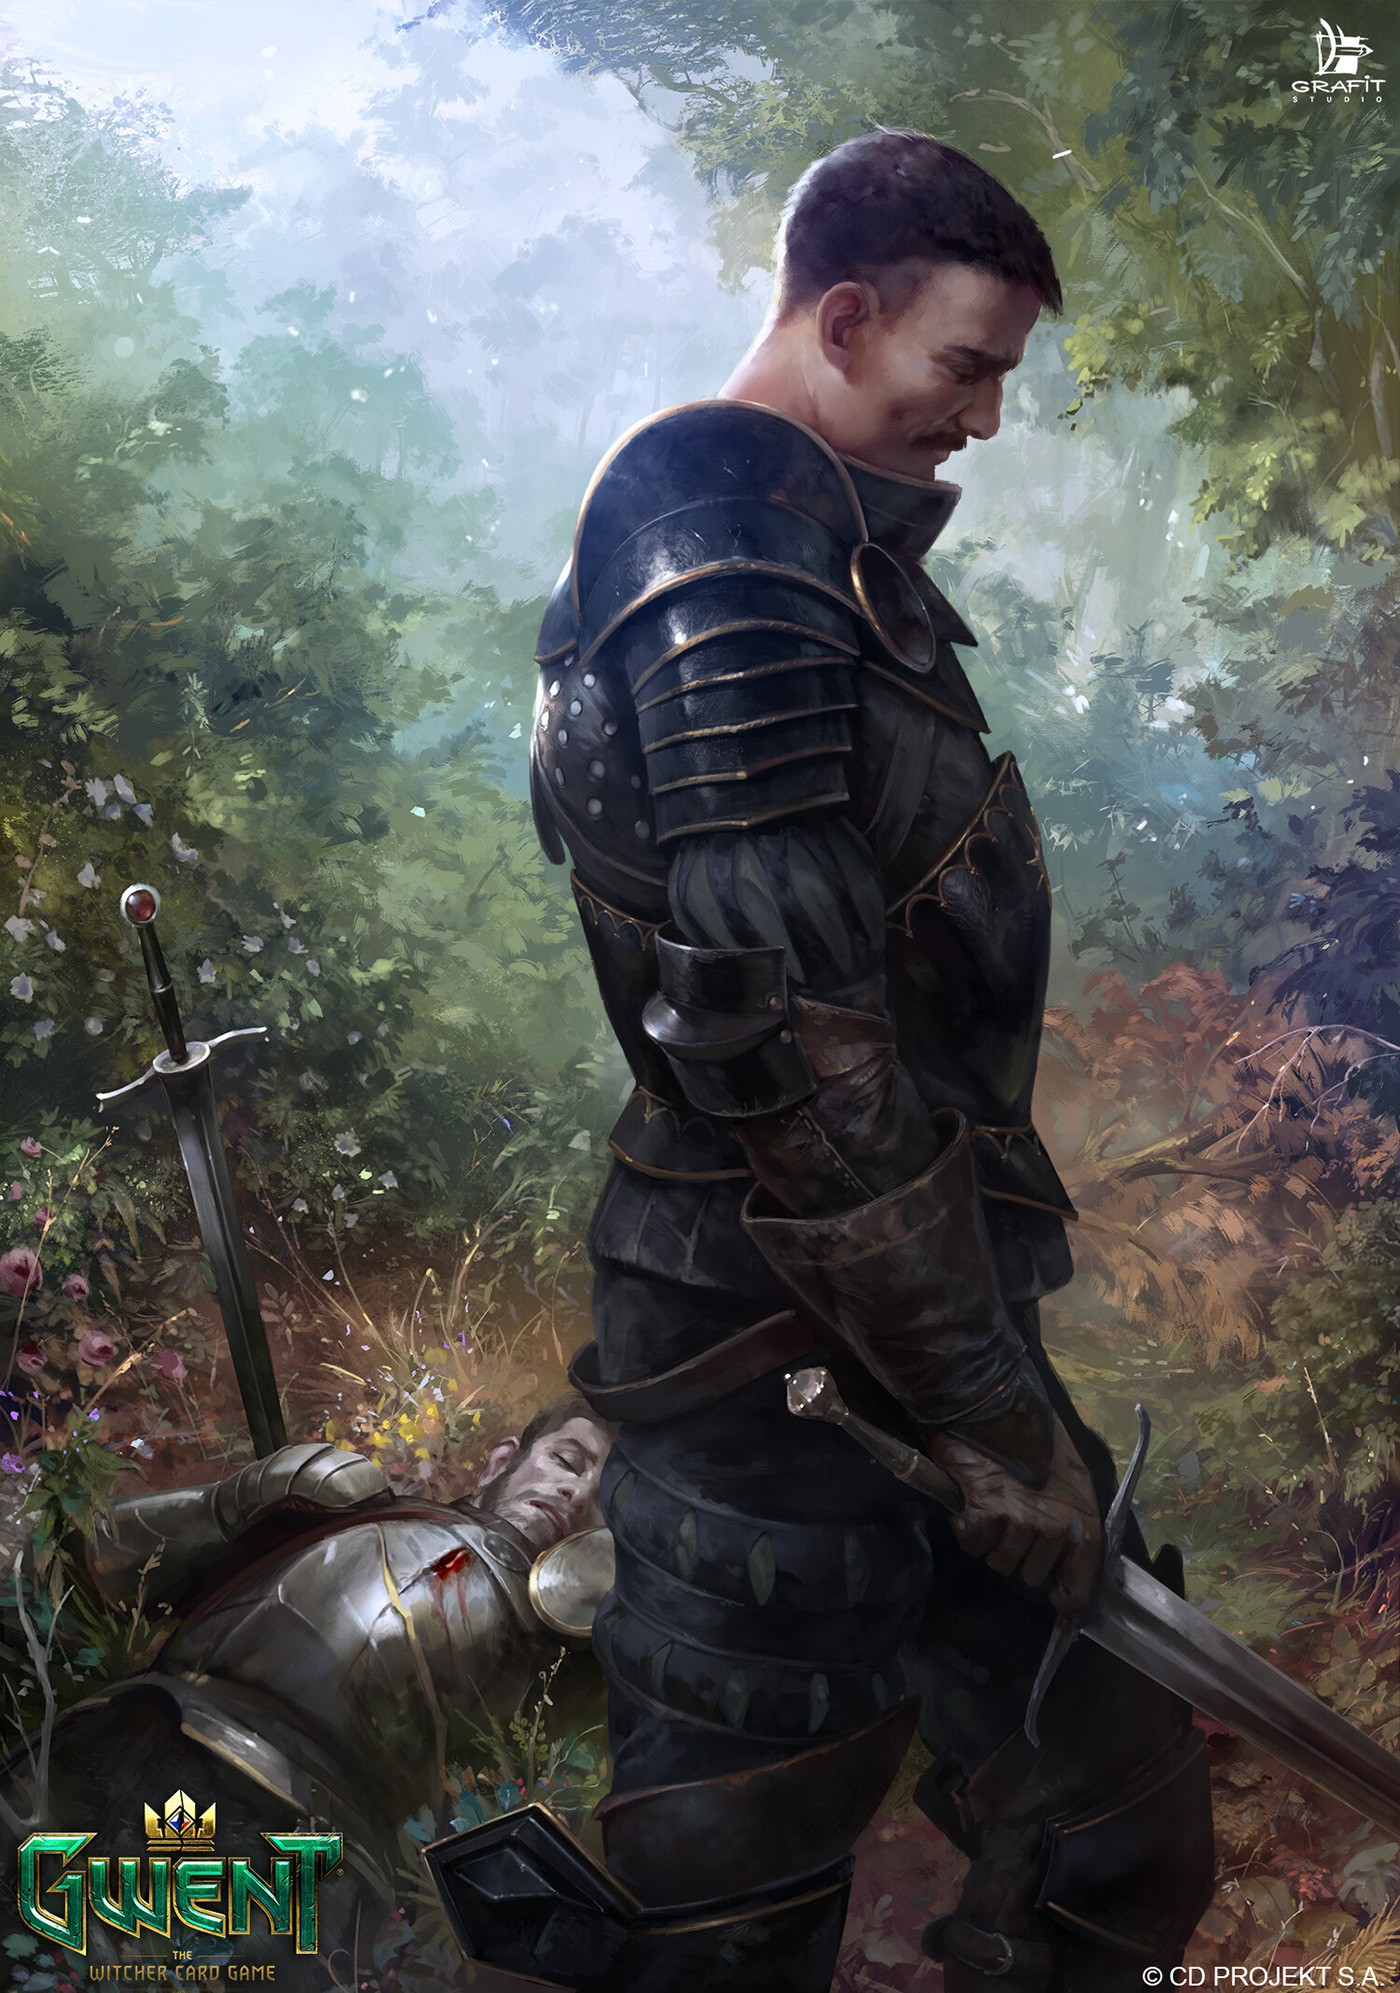 Gwent GWENT ART gwent cards art gwent game gwent illustration play gwent the witcher the witcher art witcher